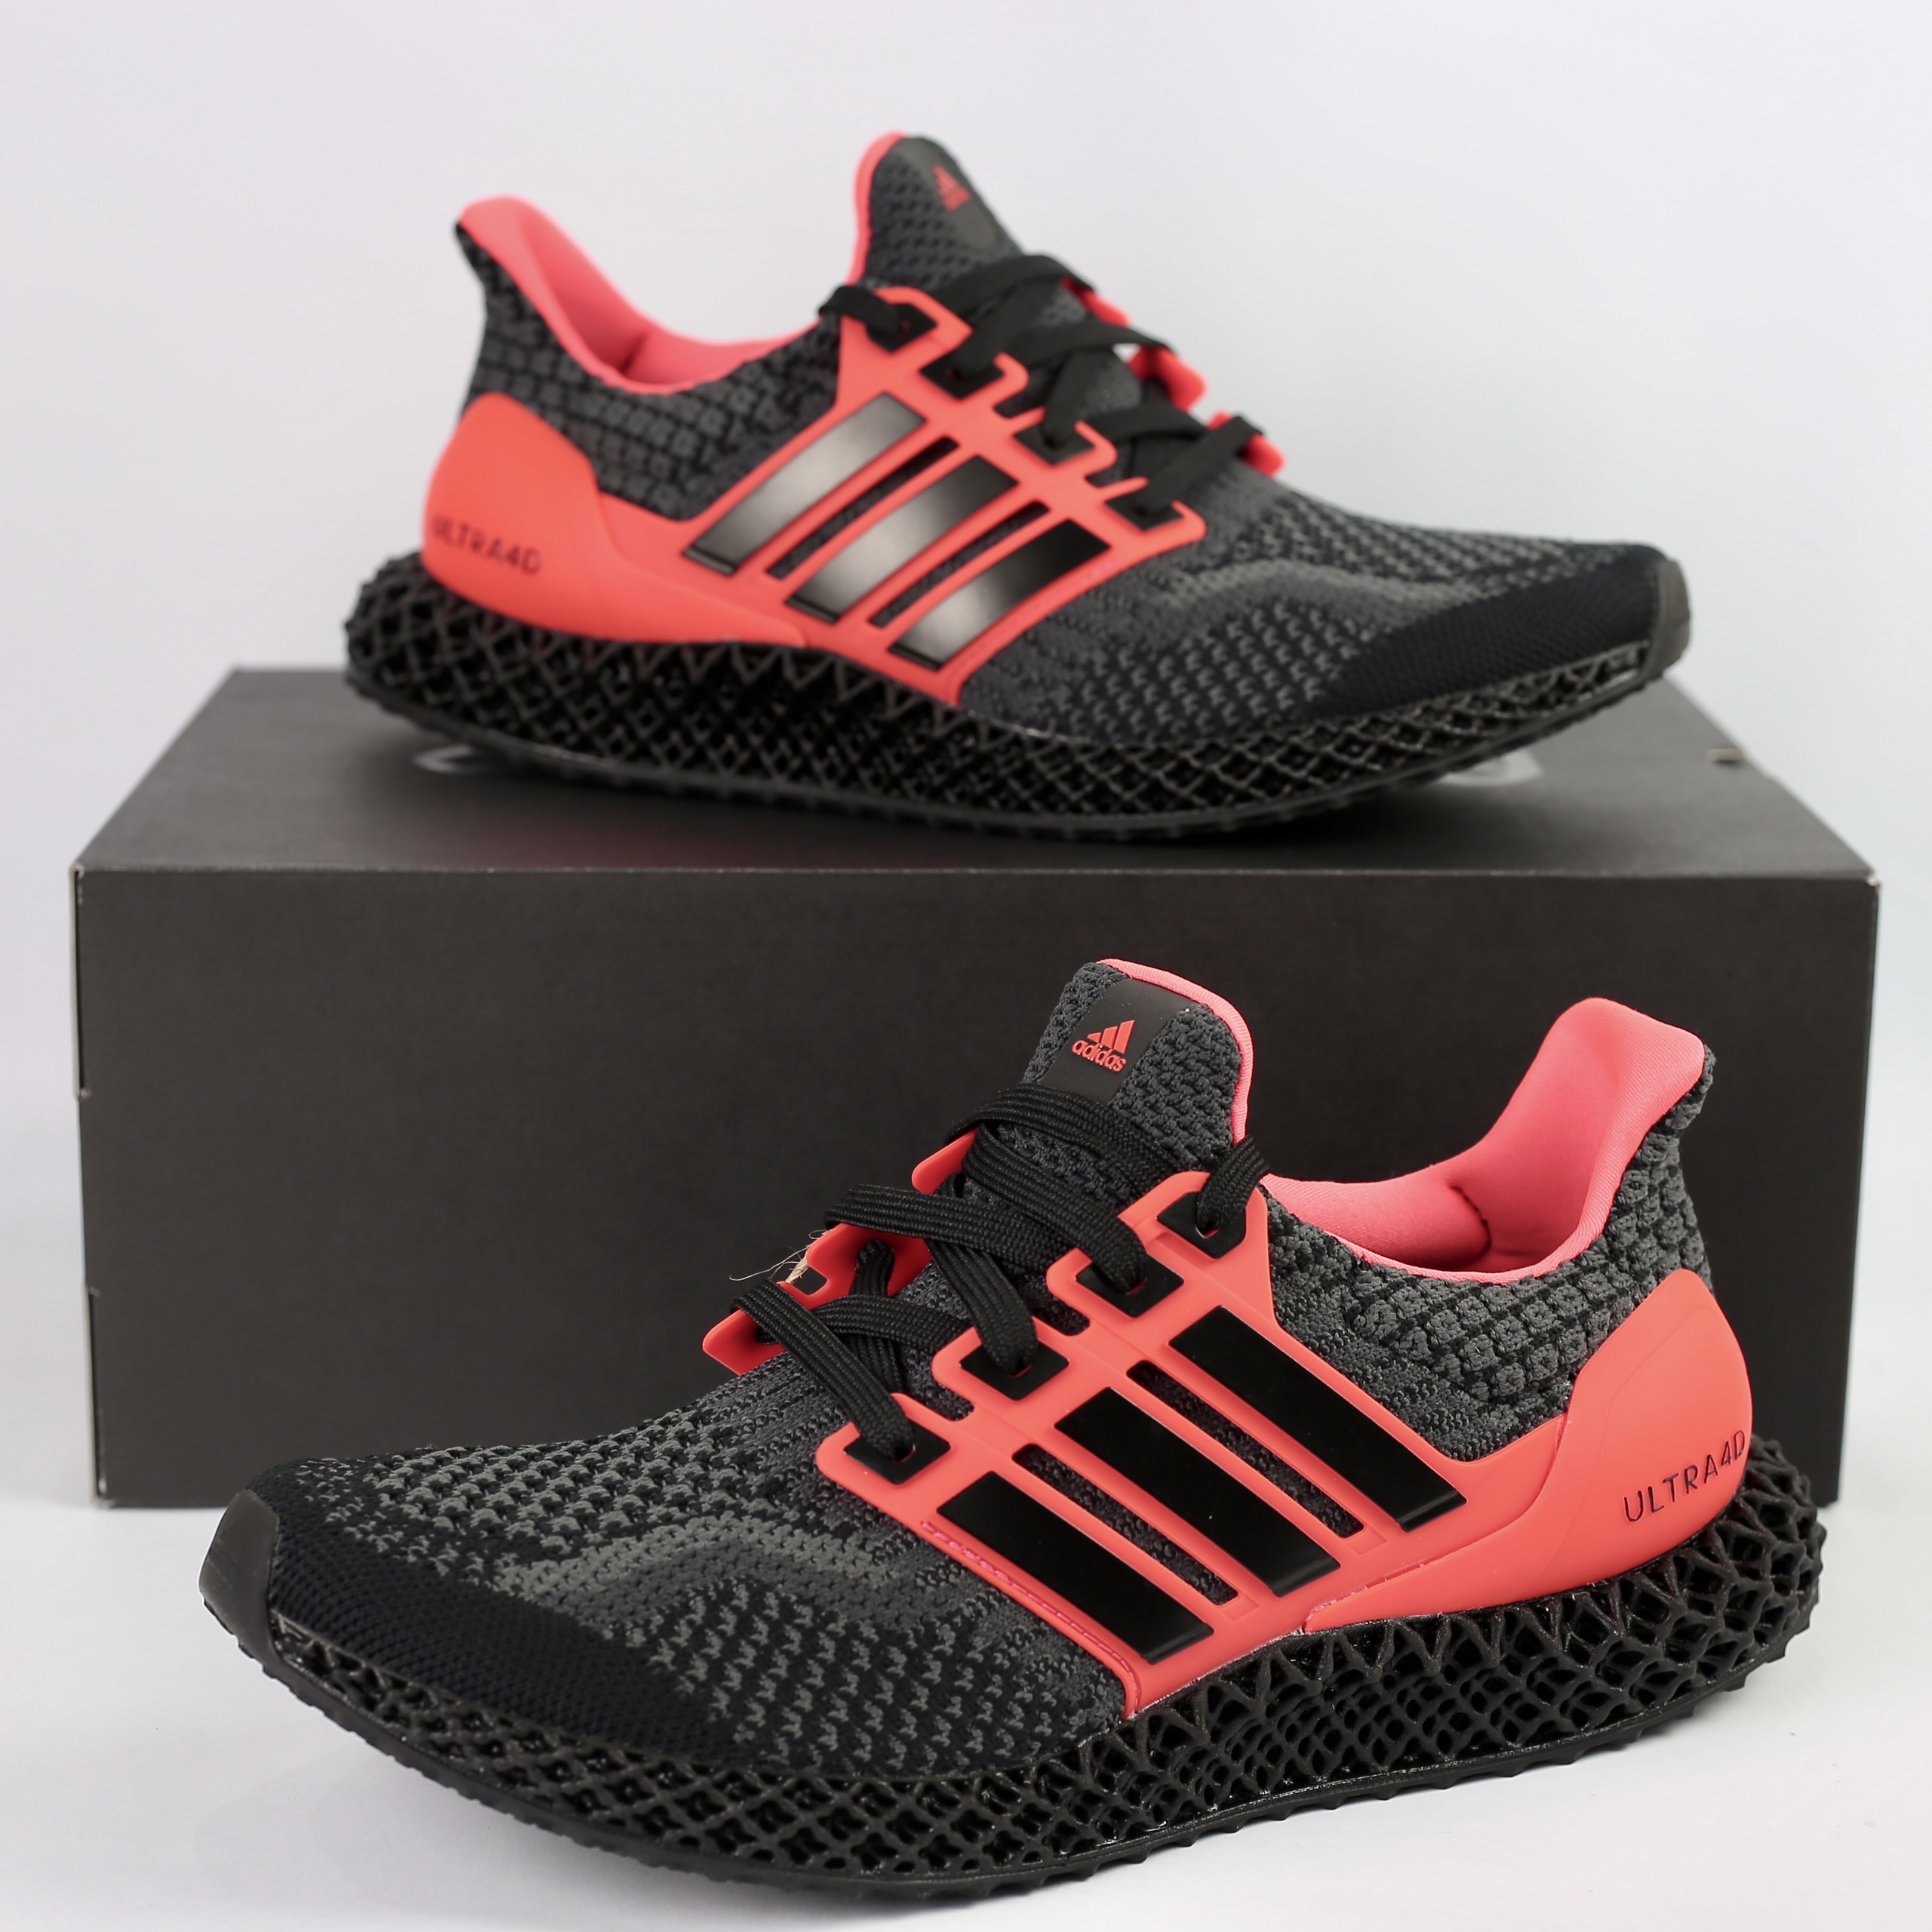 danh-gia-chi-tiet-adidas-ultra-4d-review